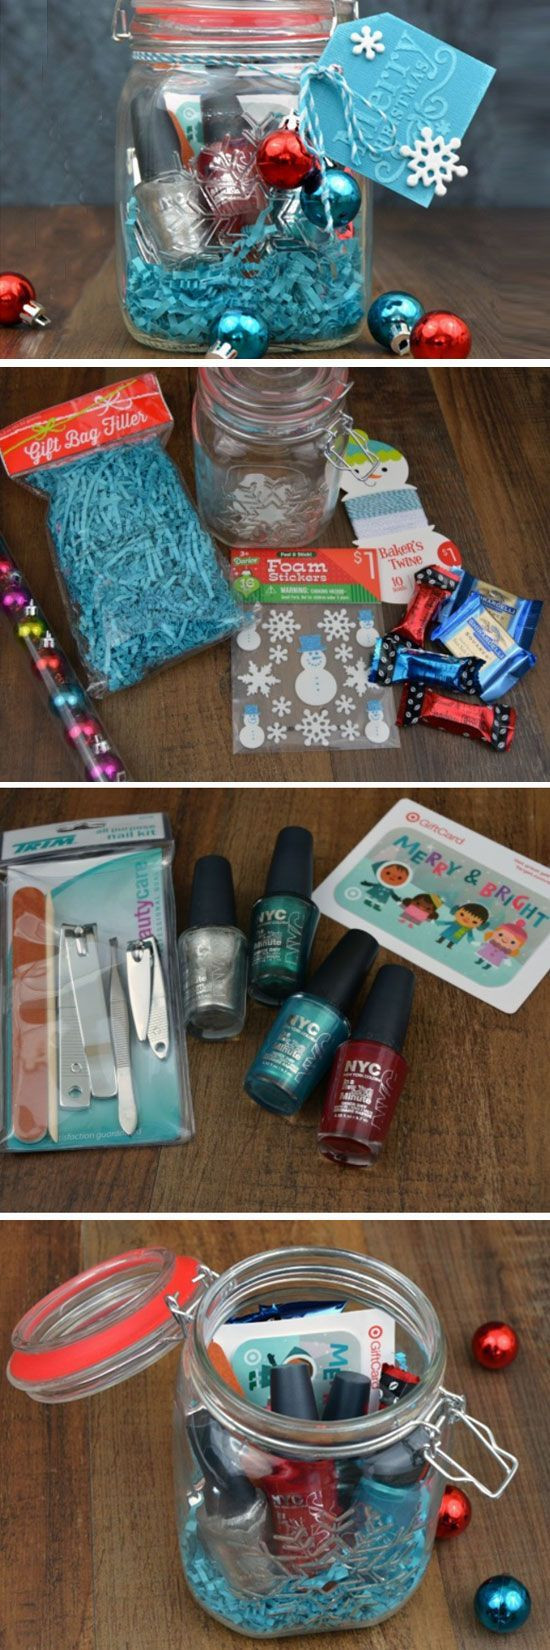 DIY Christmas Gifts For Teenagers
 Best 25 Teen t baskets ideas on Pinterest